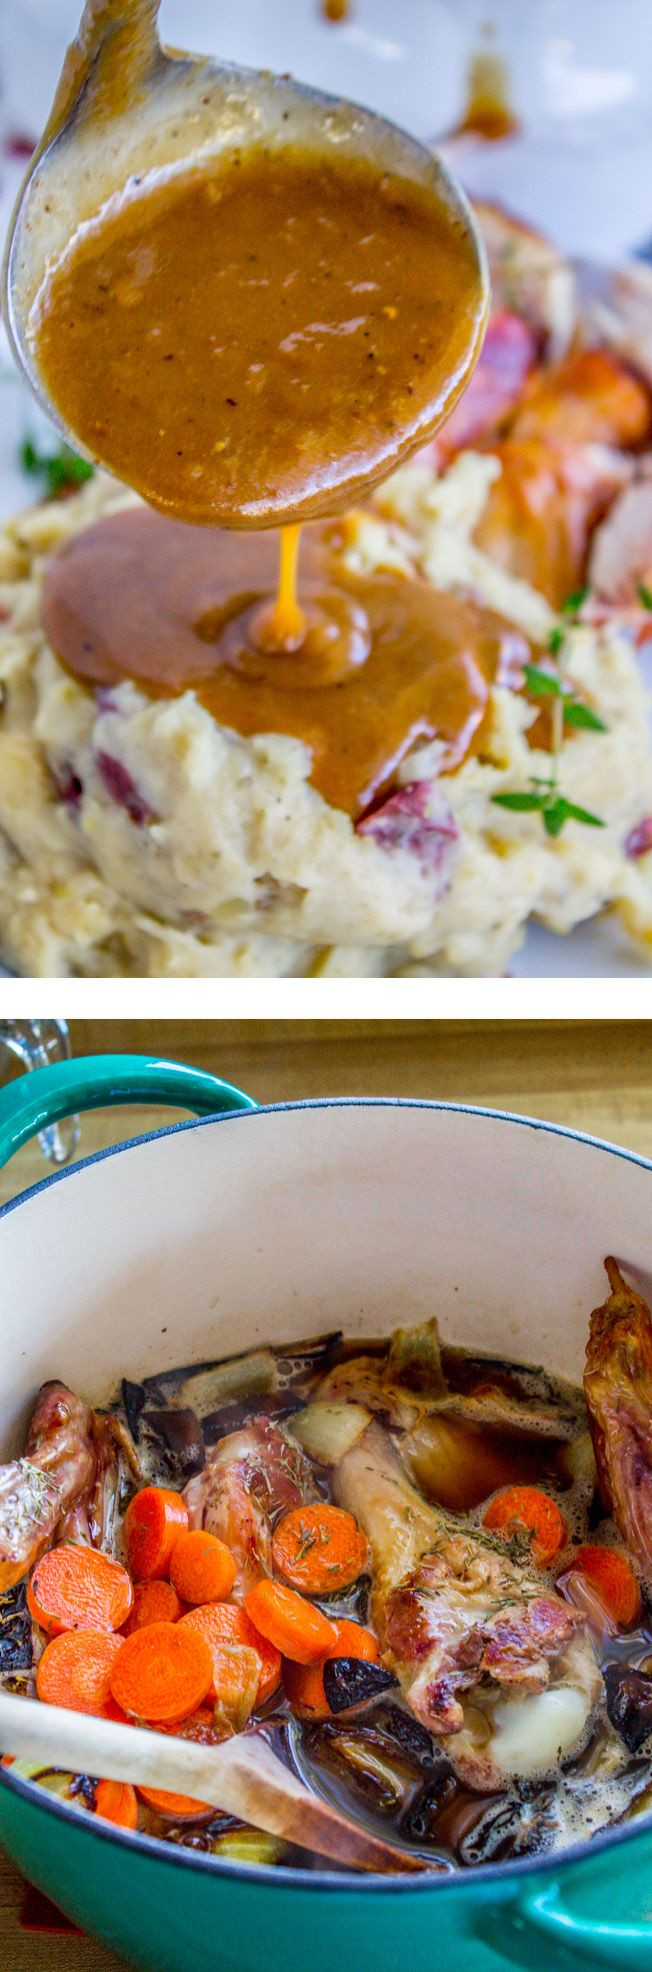 Gravy Thanksgiving Side Dishes
 This make ahead and freeze gravy is so easy and saves